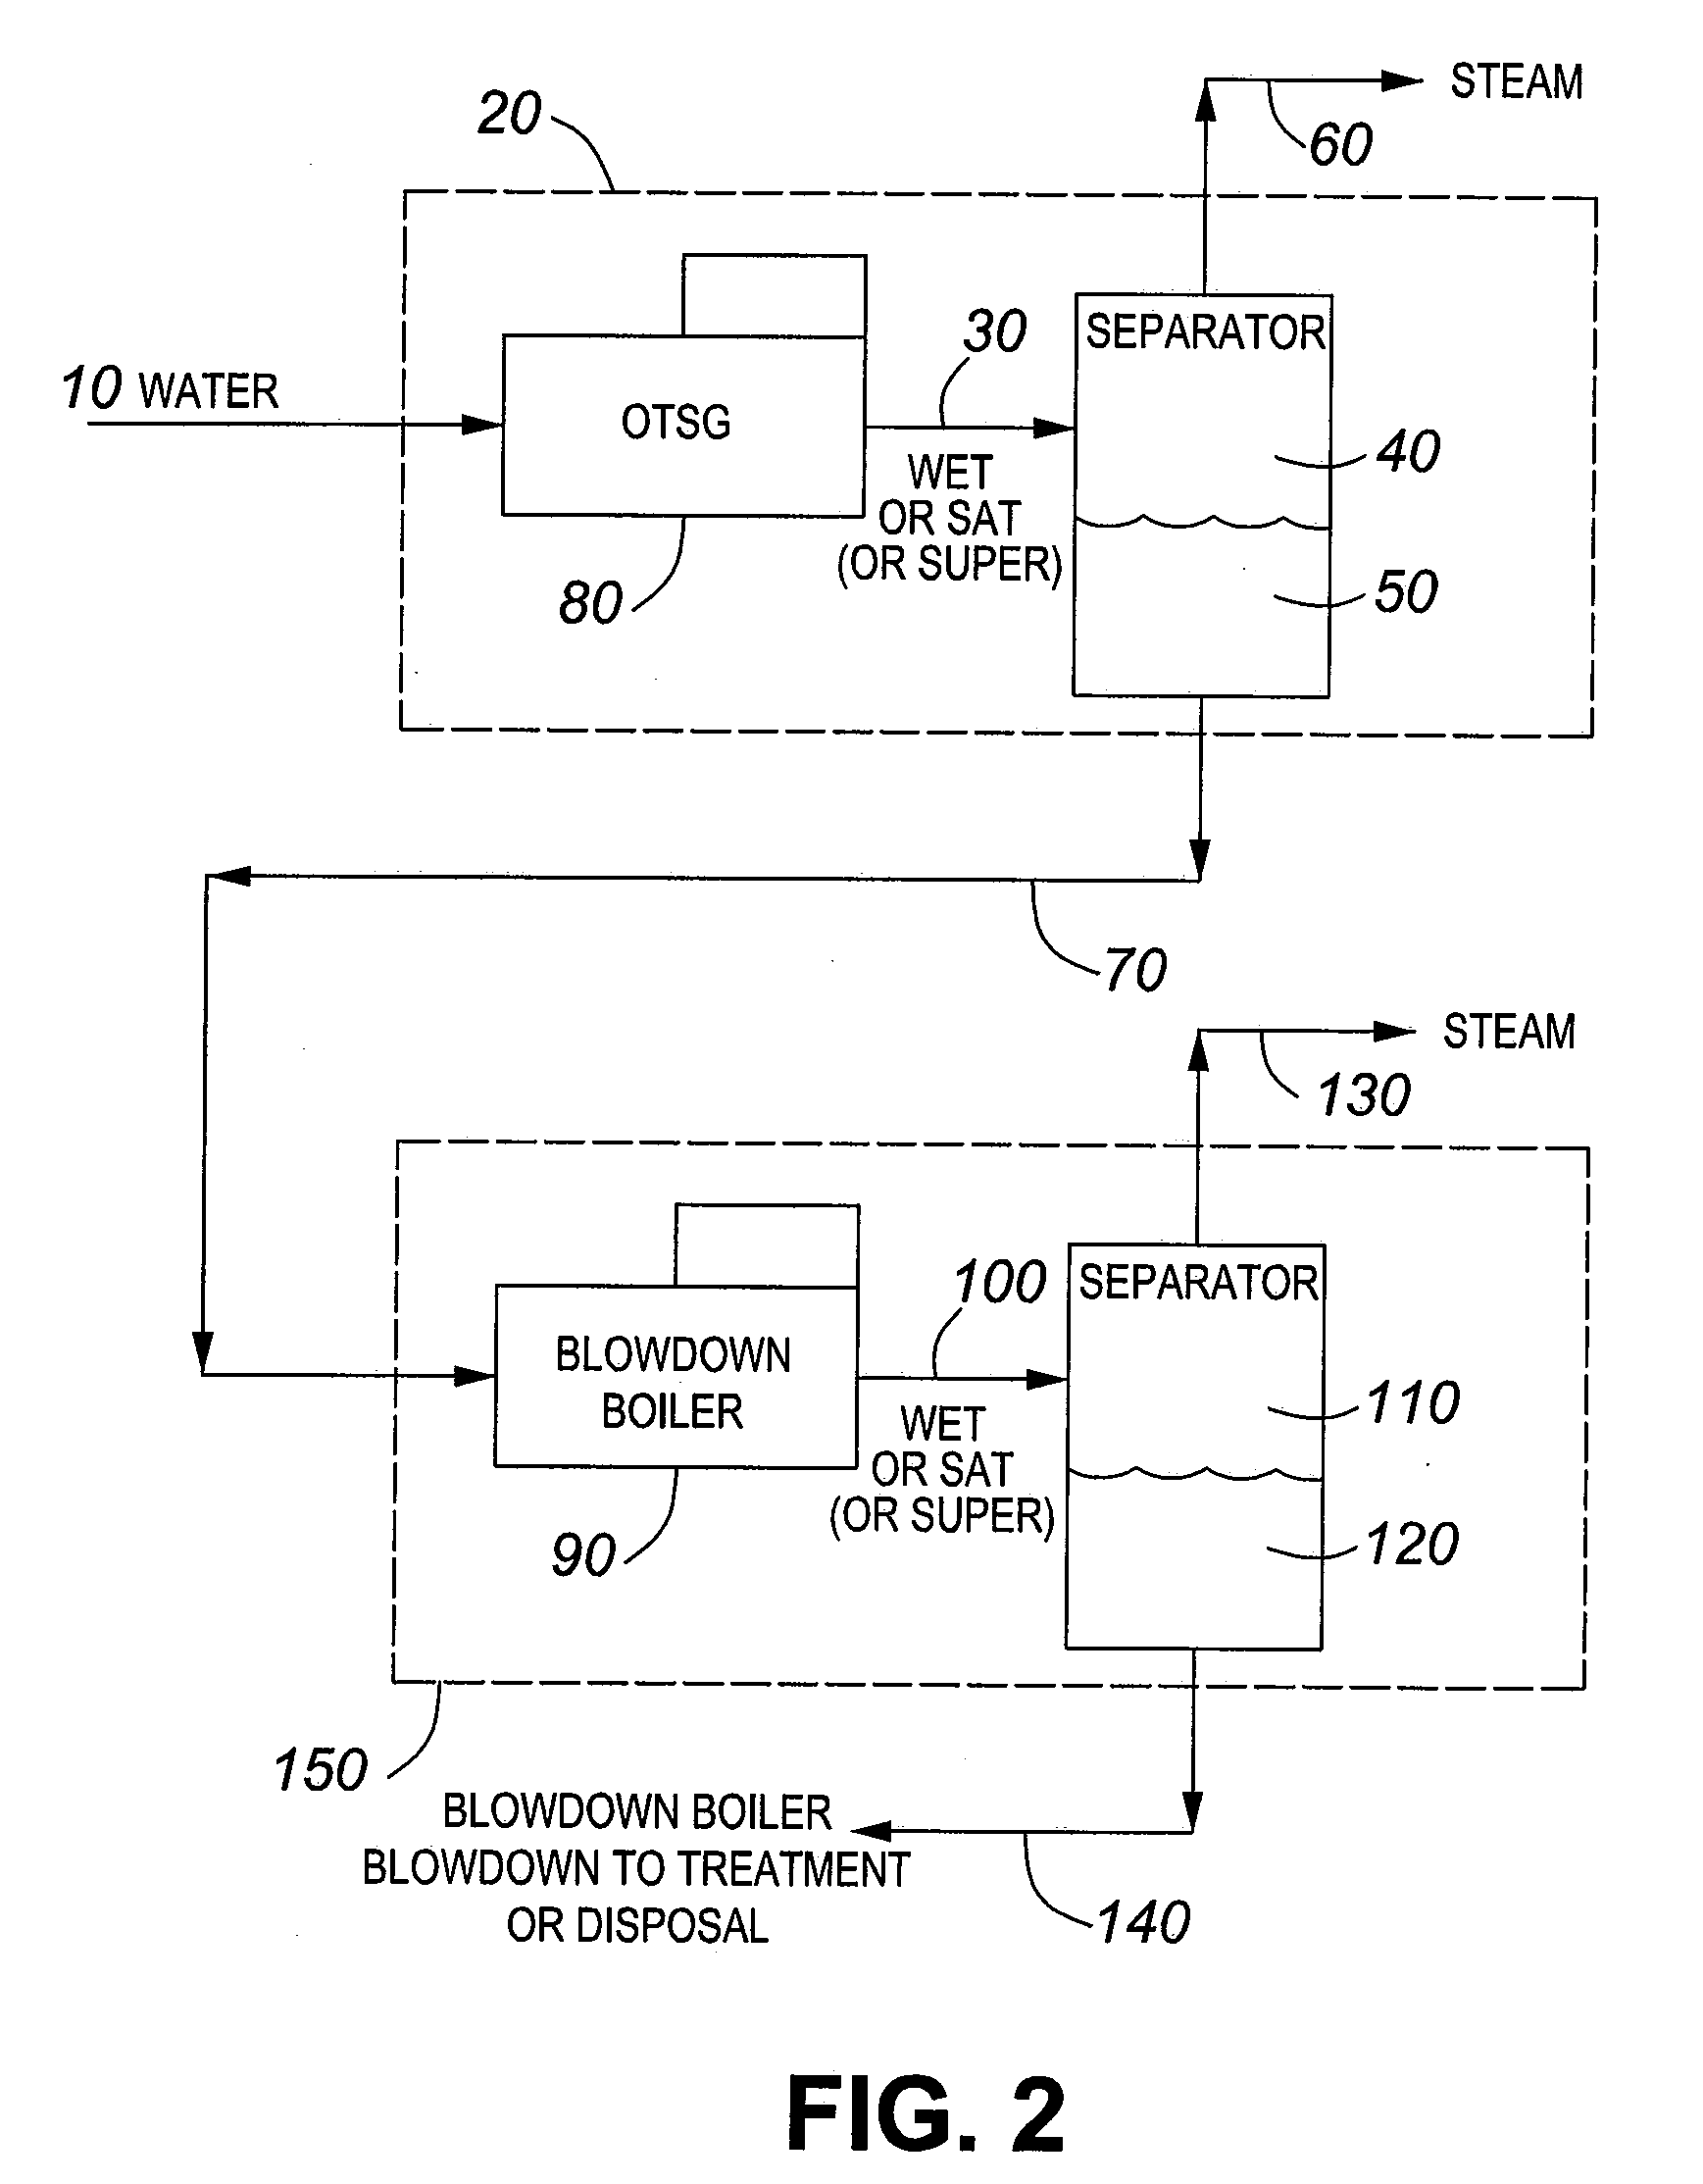 Method and apparatus for steam generation